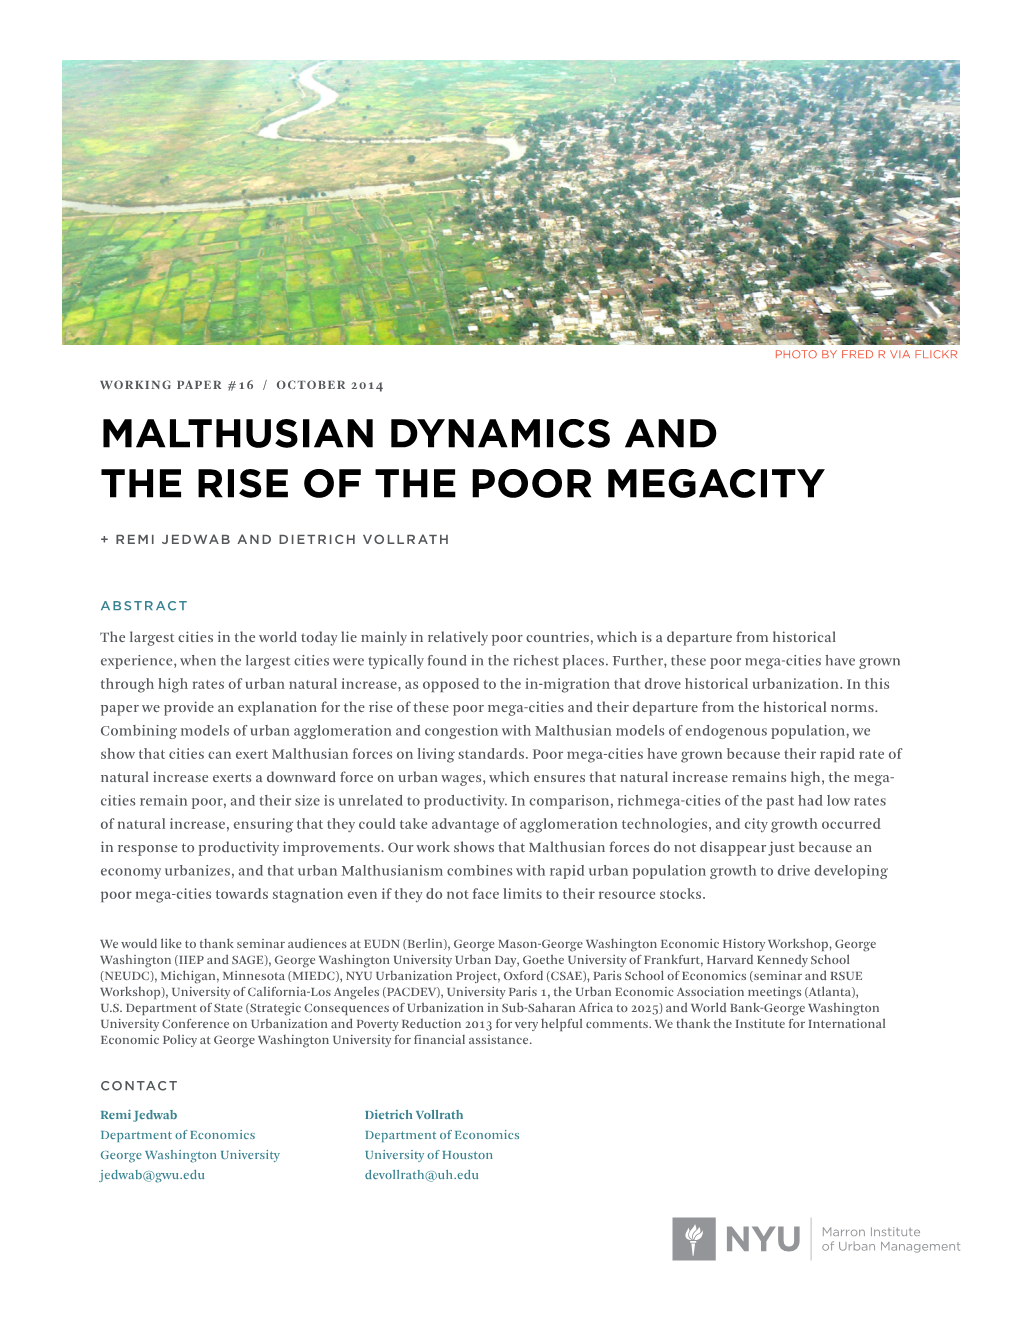 Malthusian Dynamics and the Rise of the Poor Megacity